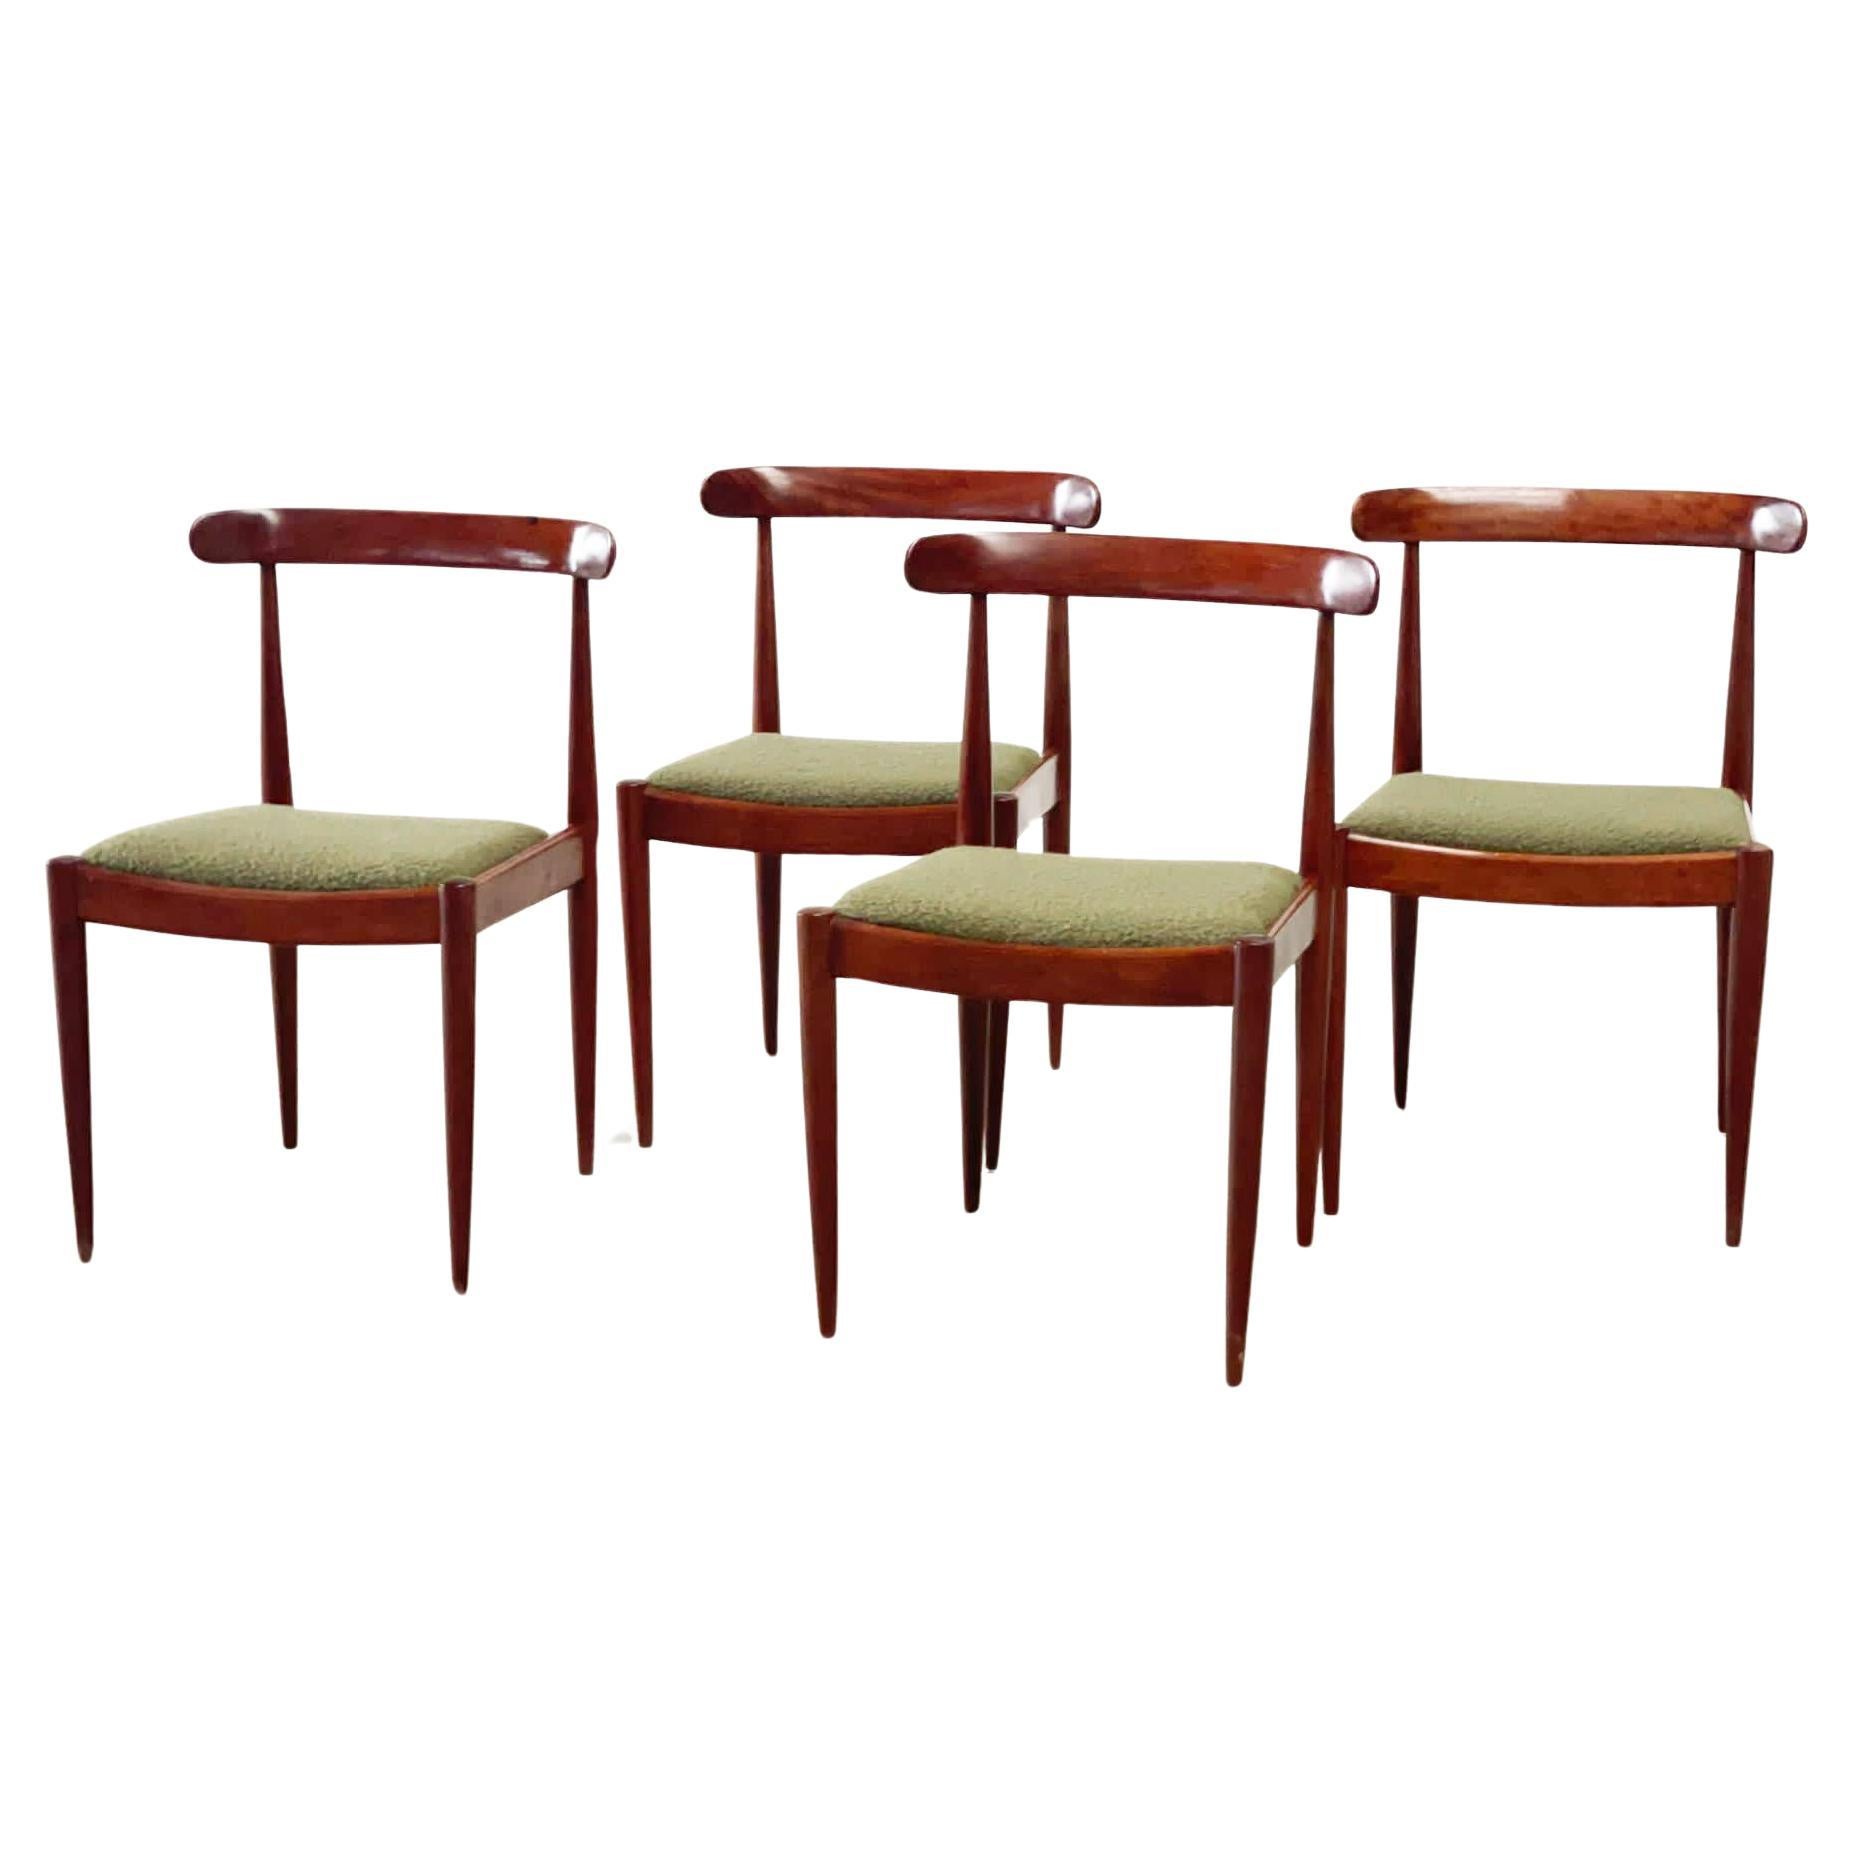 4 wooden dining chairs by Alfred Hendrickx